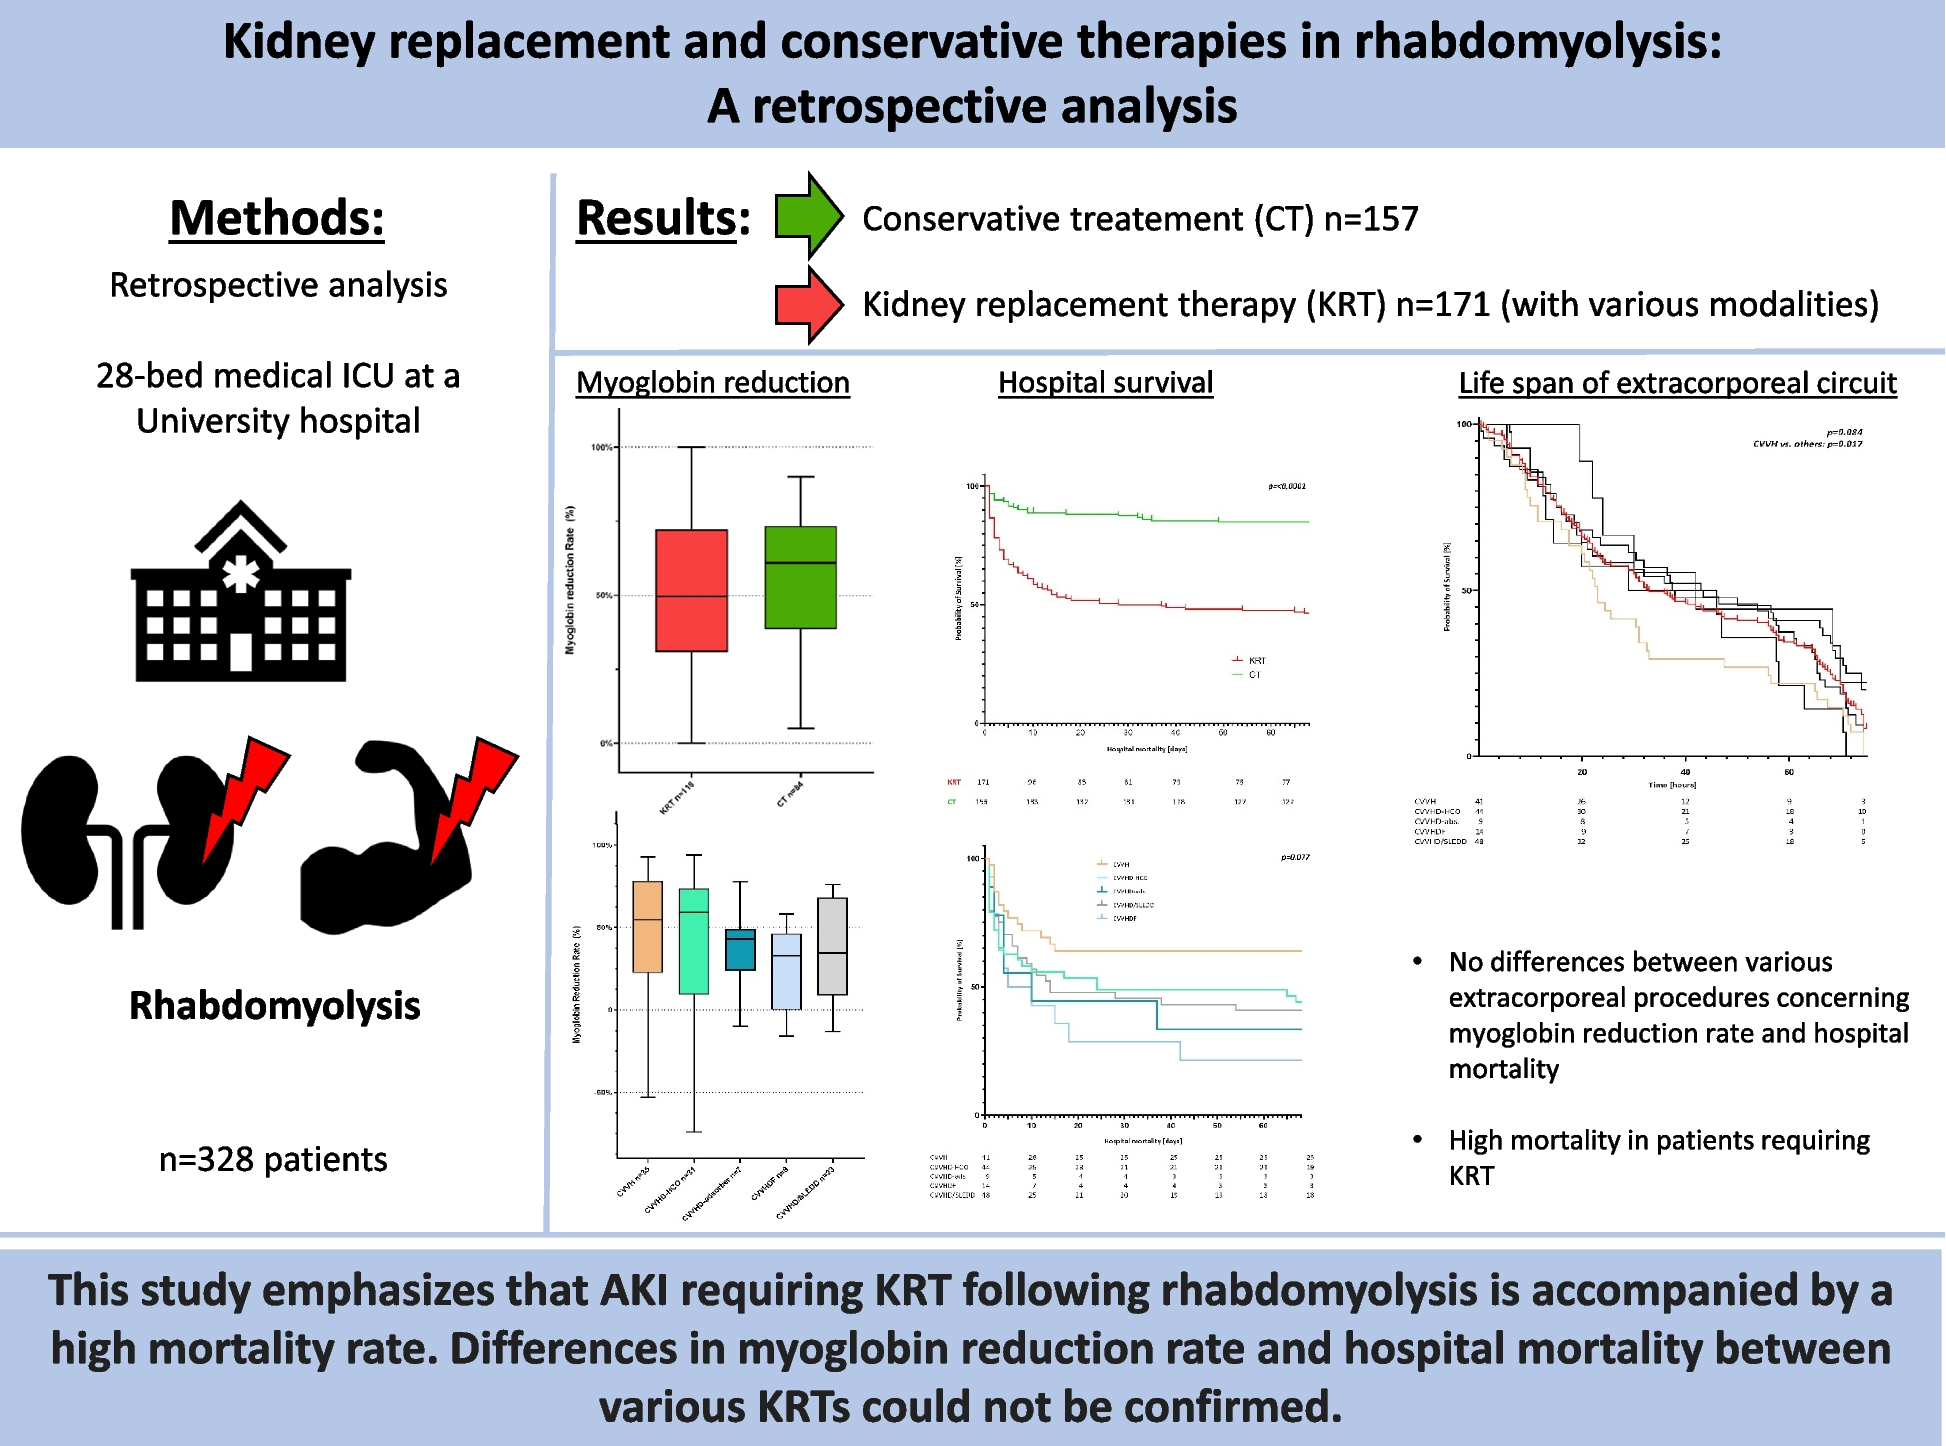 Kidney replacement and conservative therapies in rhabdomyolysis: a retrospective analysis